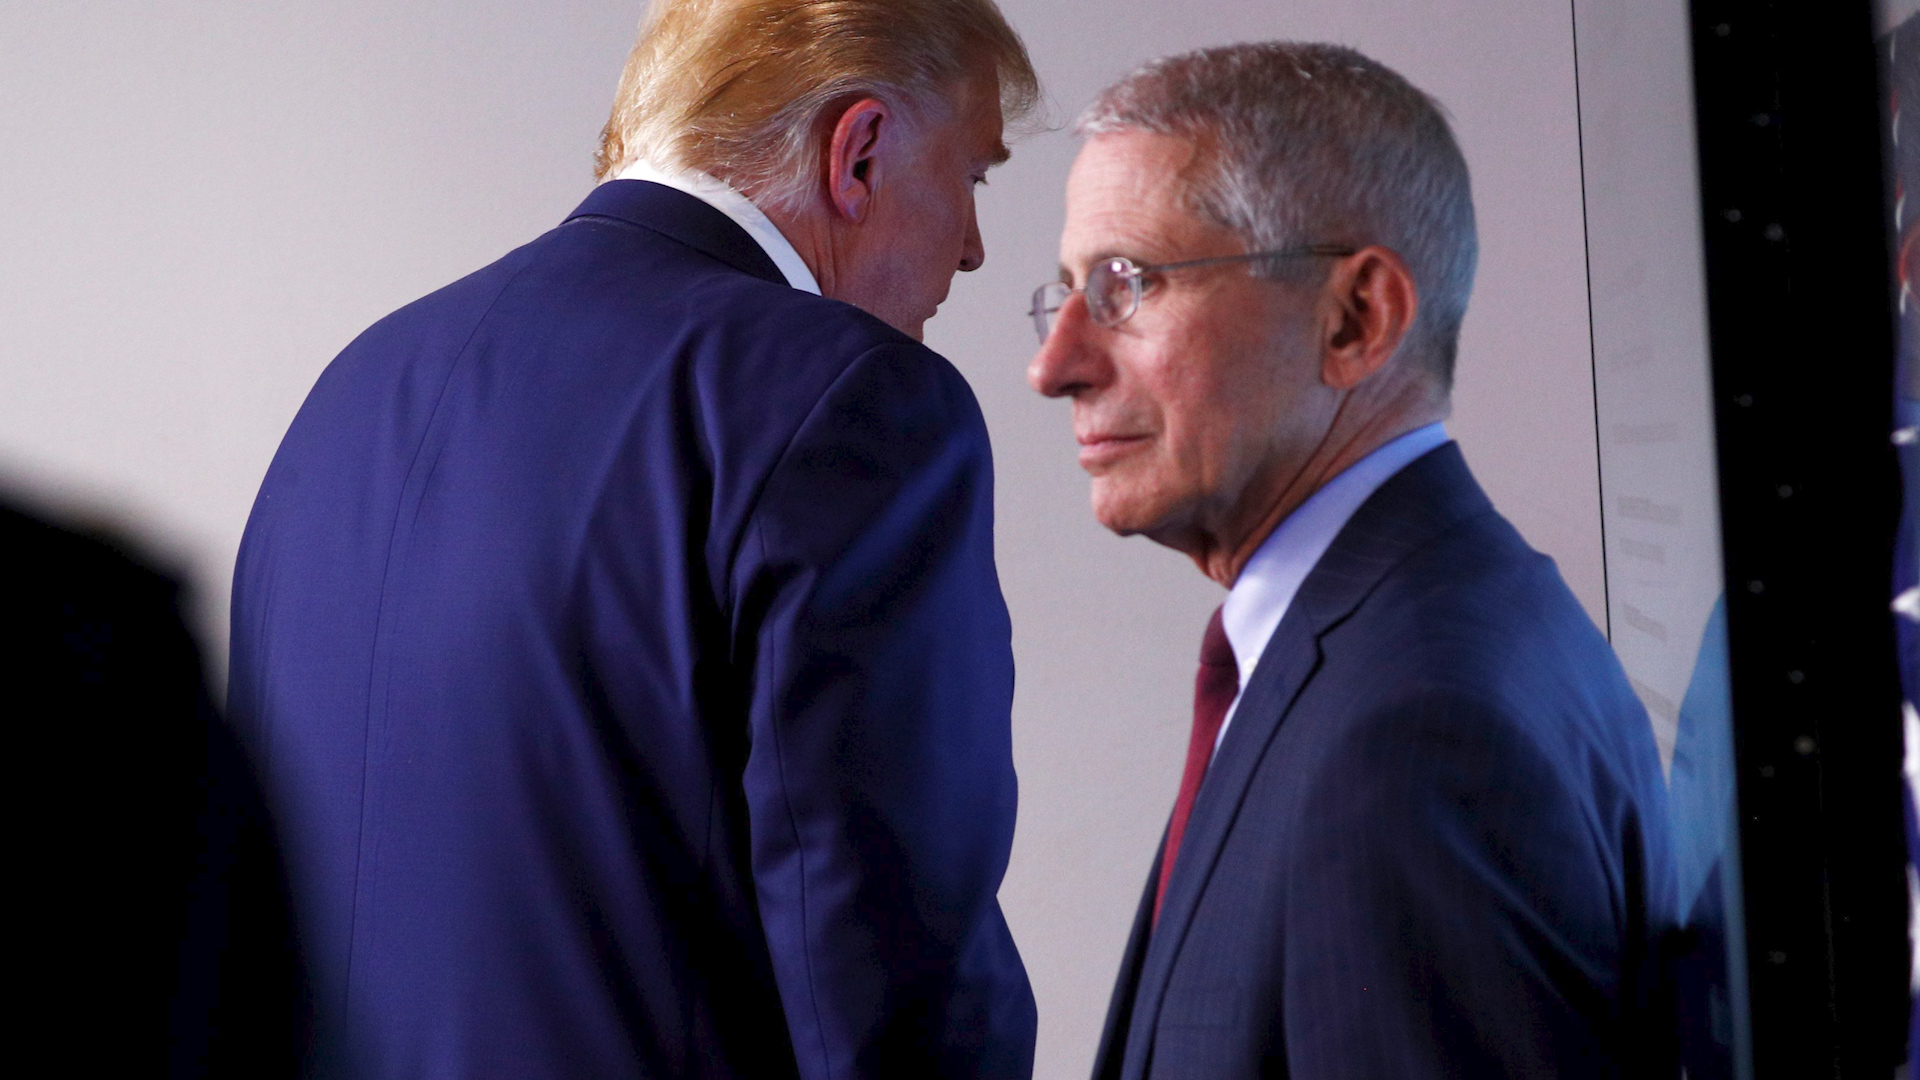 Anthony Fauci's security is stepped up as doctor and face of U.S.  coronavirus response receives threats - The Washington Post